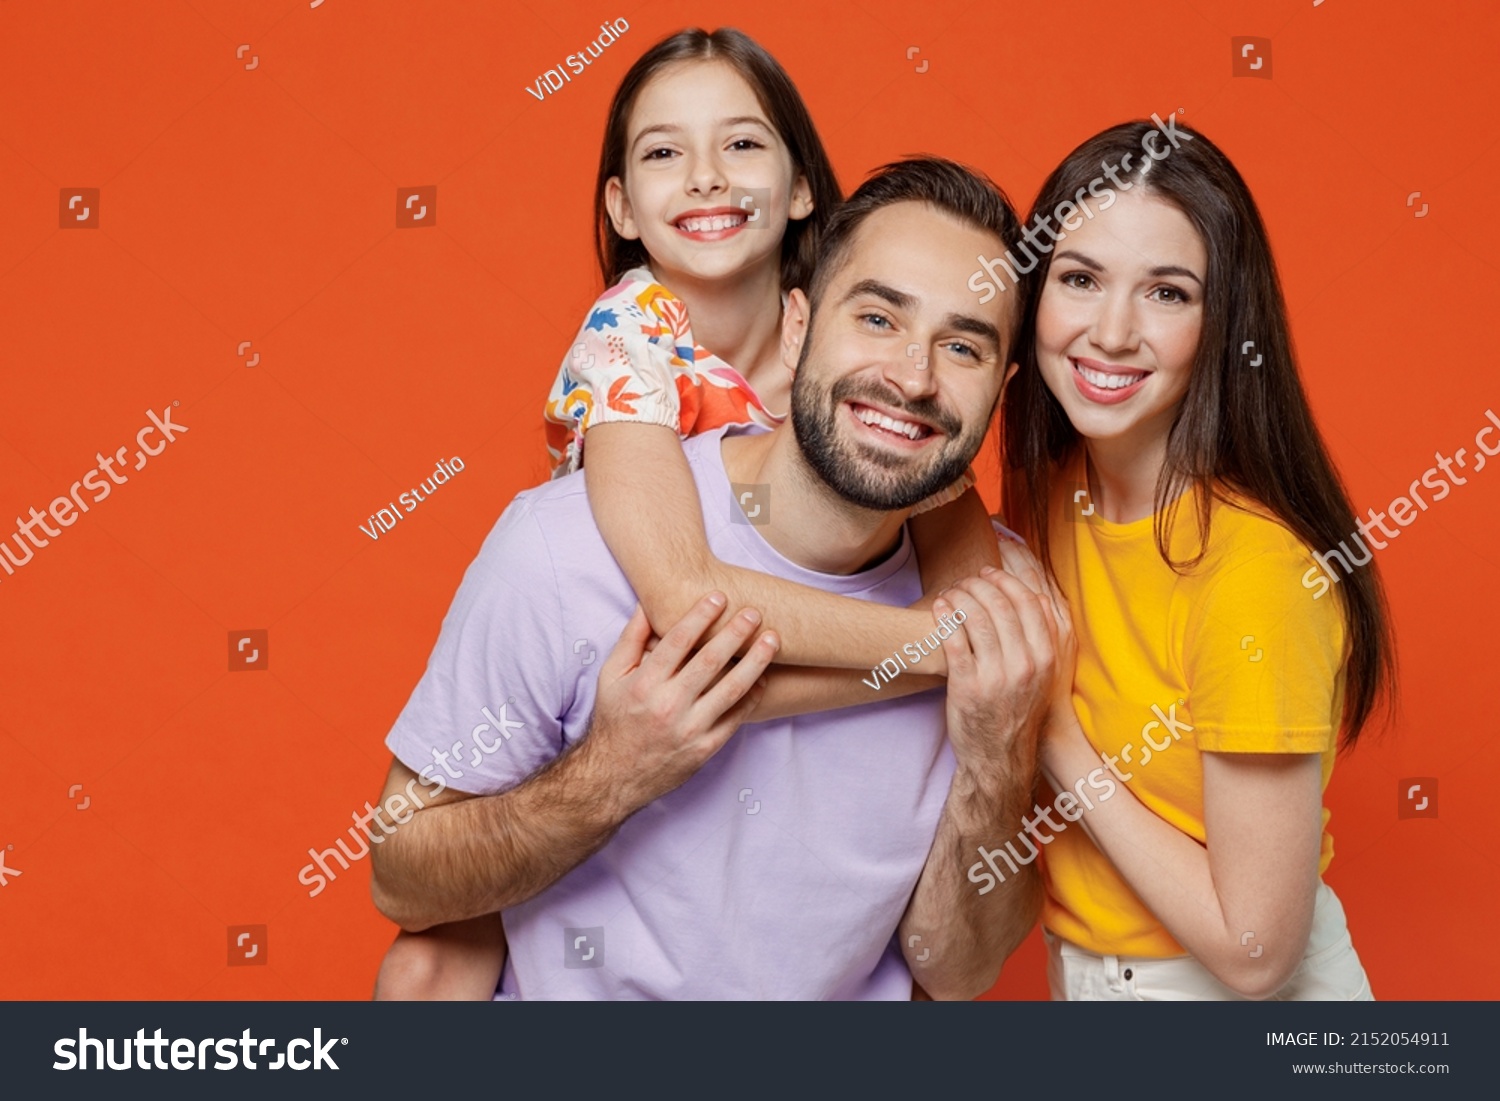 Young happy parents mom dad with child kid daughter teen girl wear basic t-shirts giving piggyback to daughter isolated on yellow background studio portrait. Family day parenthood childhood concept. #2152054911